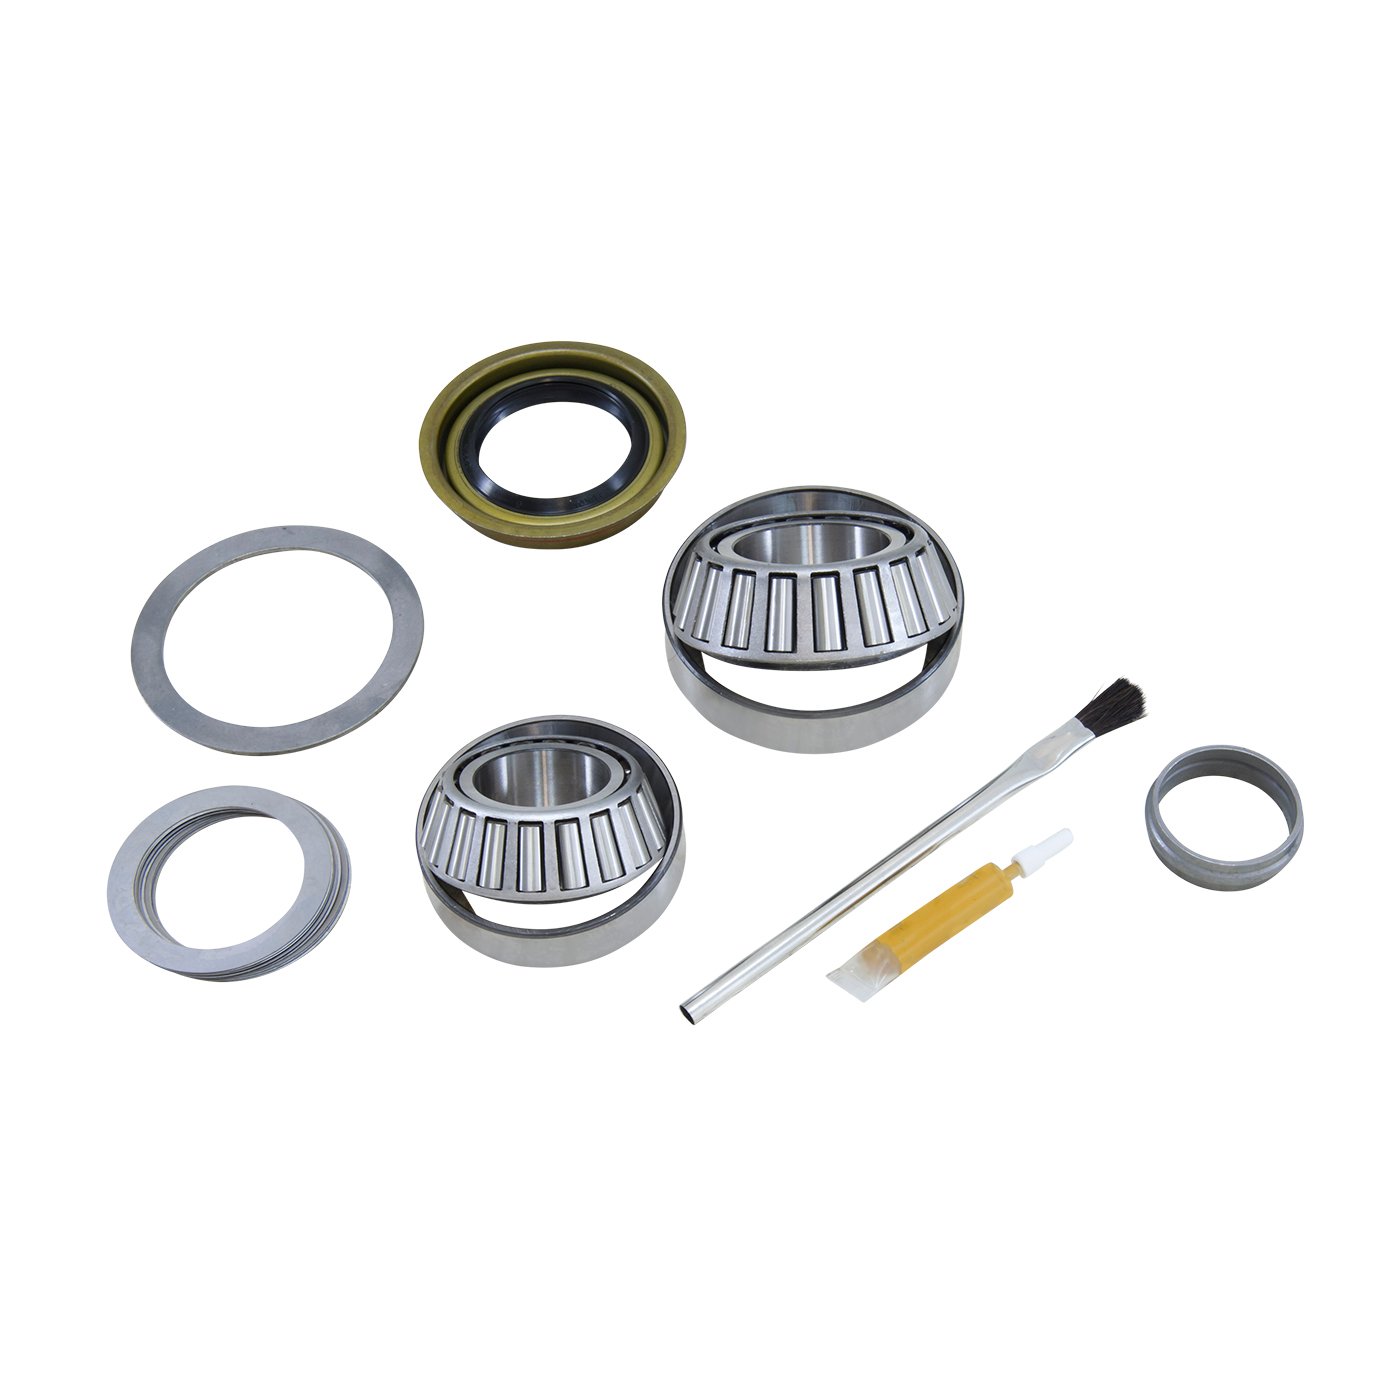 Pinion Install Kit For Model 20 Differential